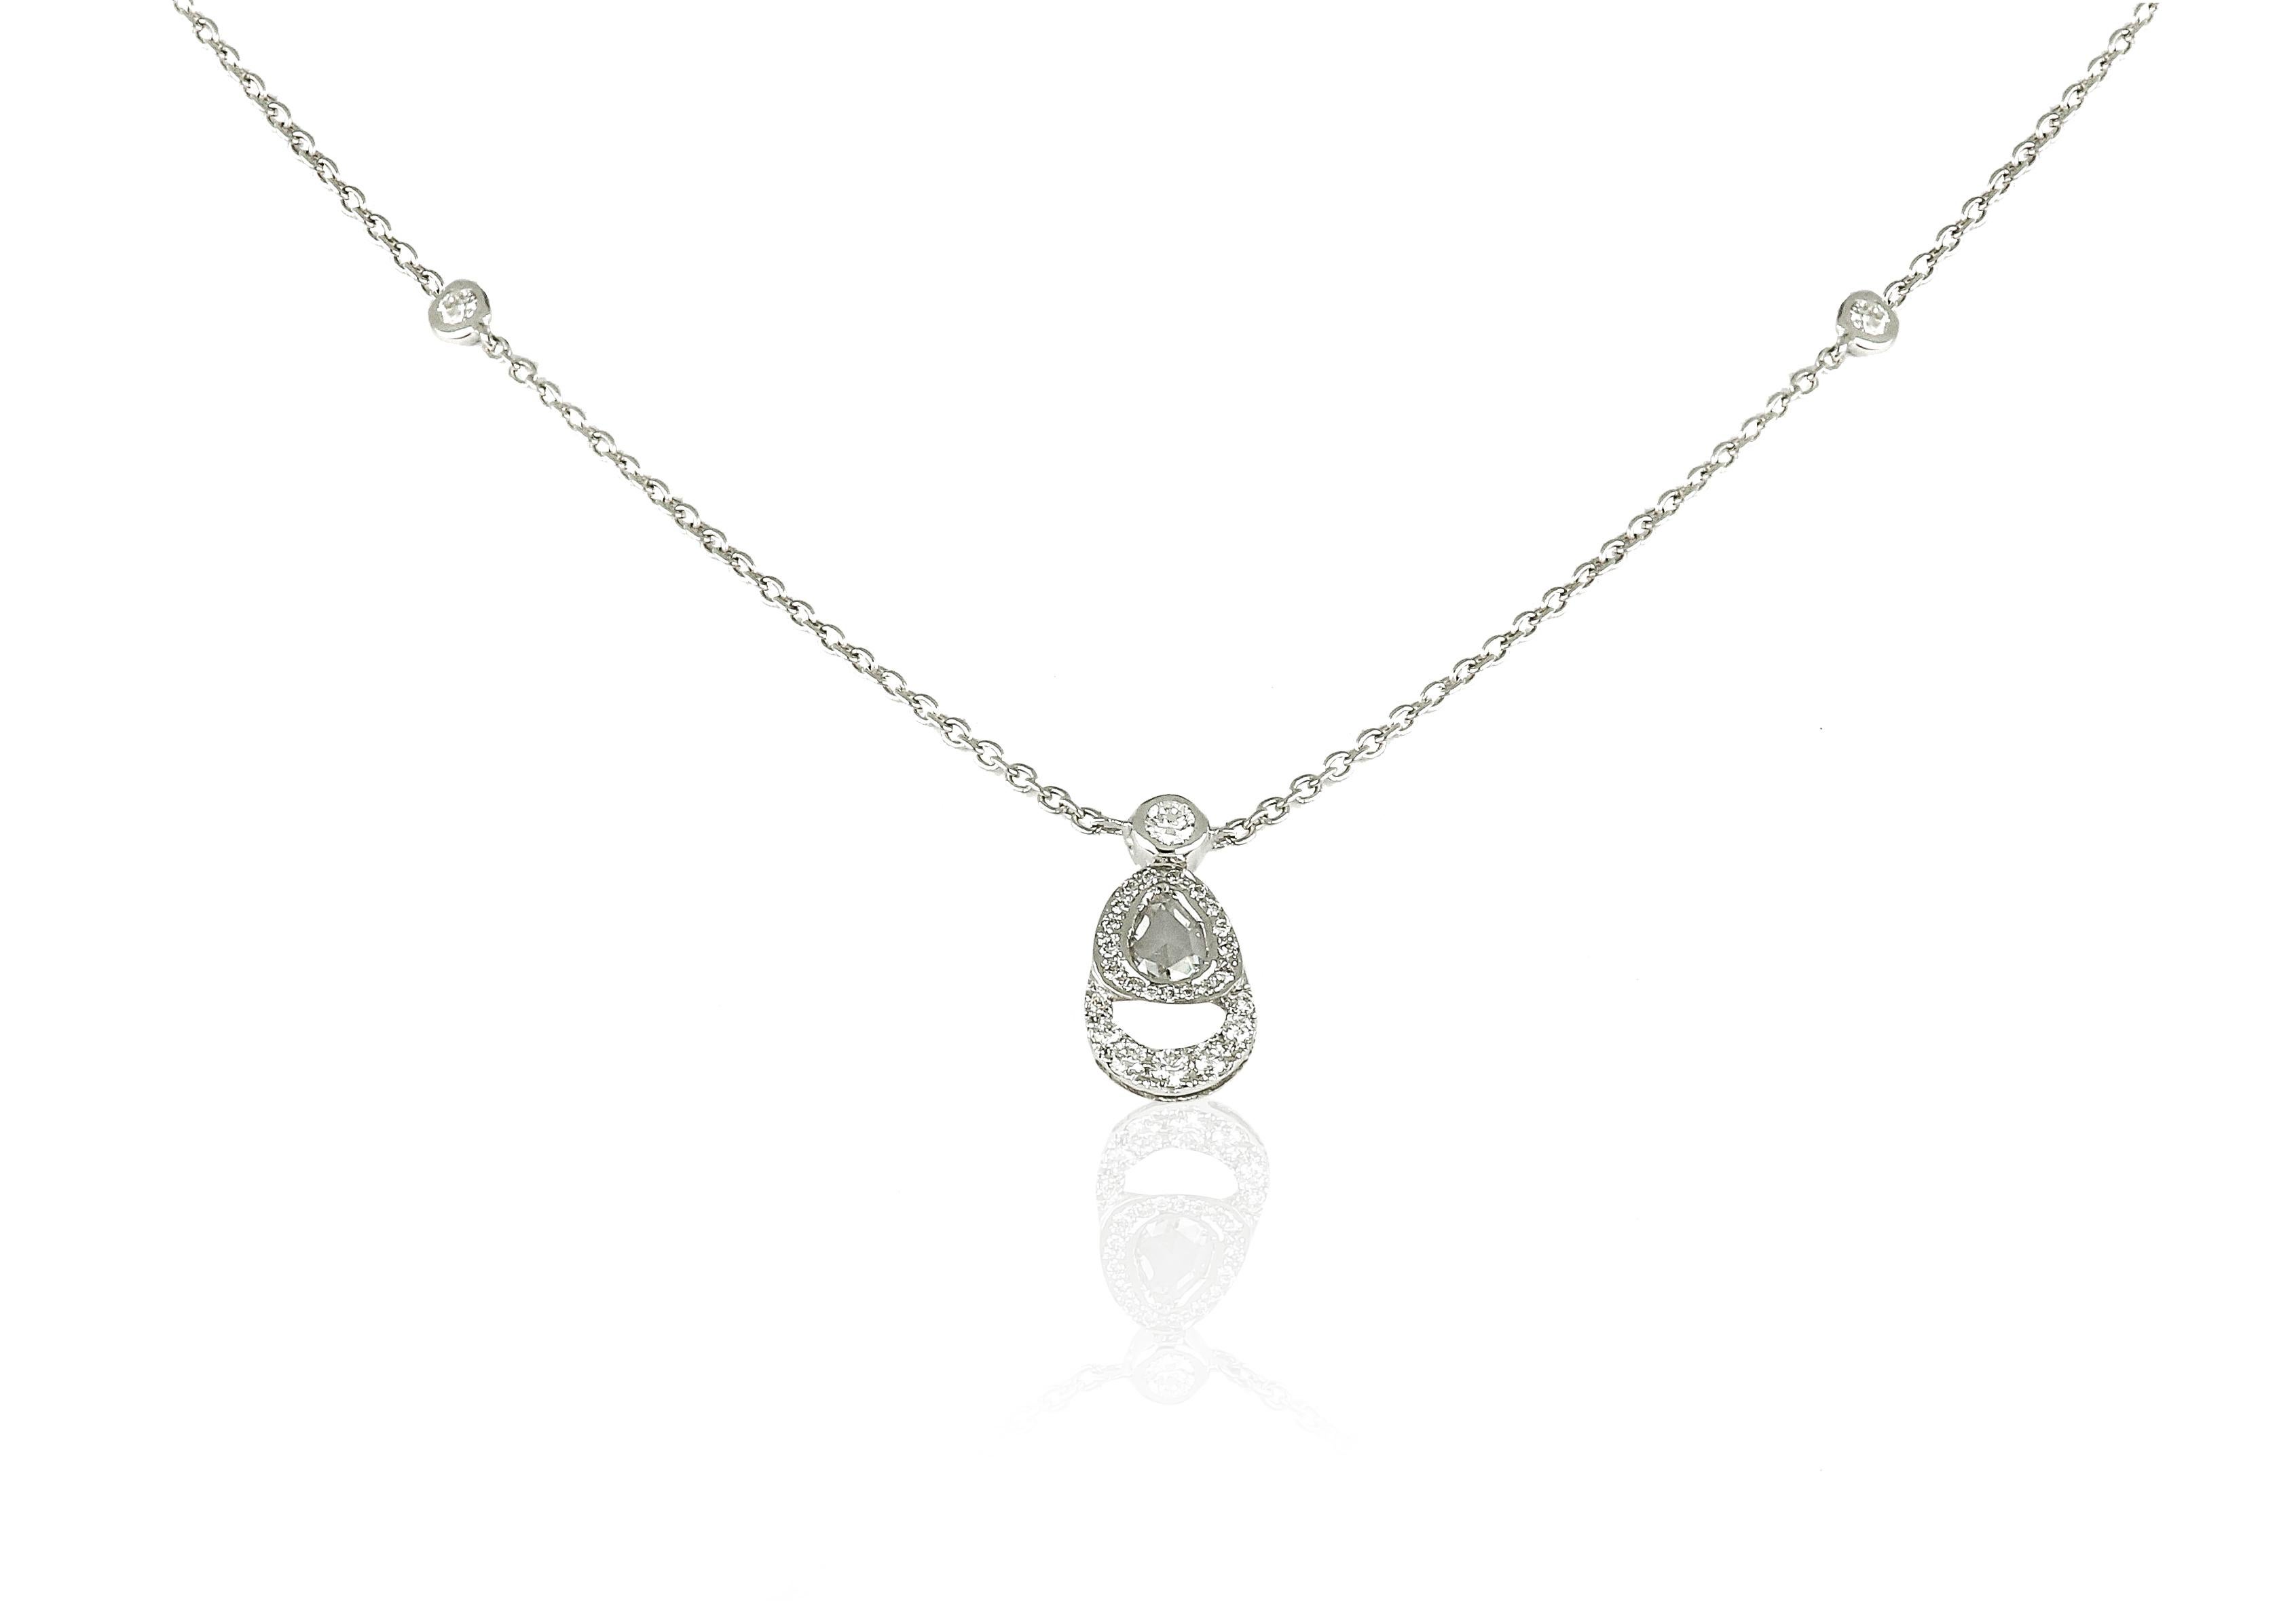 There is incredible classiness in the purest of designs. Amwaj 18 karat white gold pendant from the palm tree collection features rose cut diamond, surrounded by a medley of small round diamonds. This gold pendant highlights the ultimate